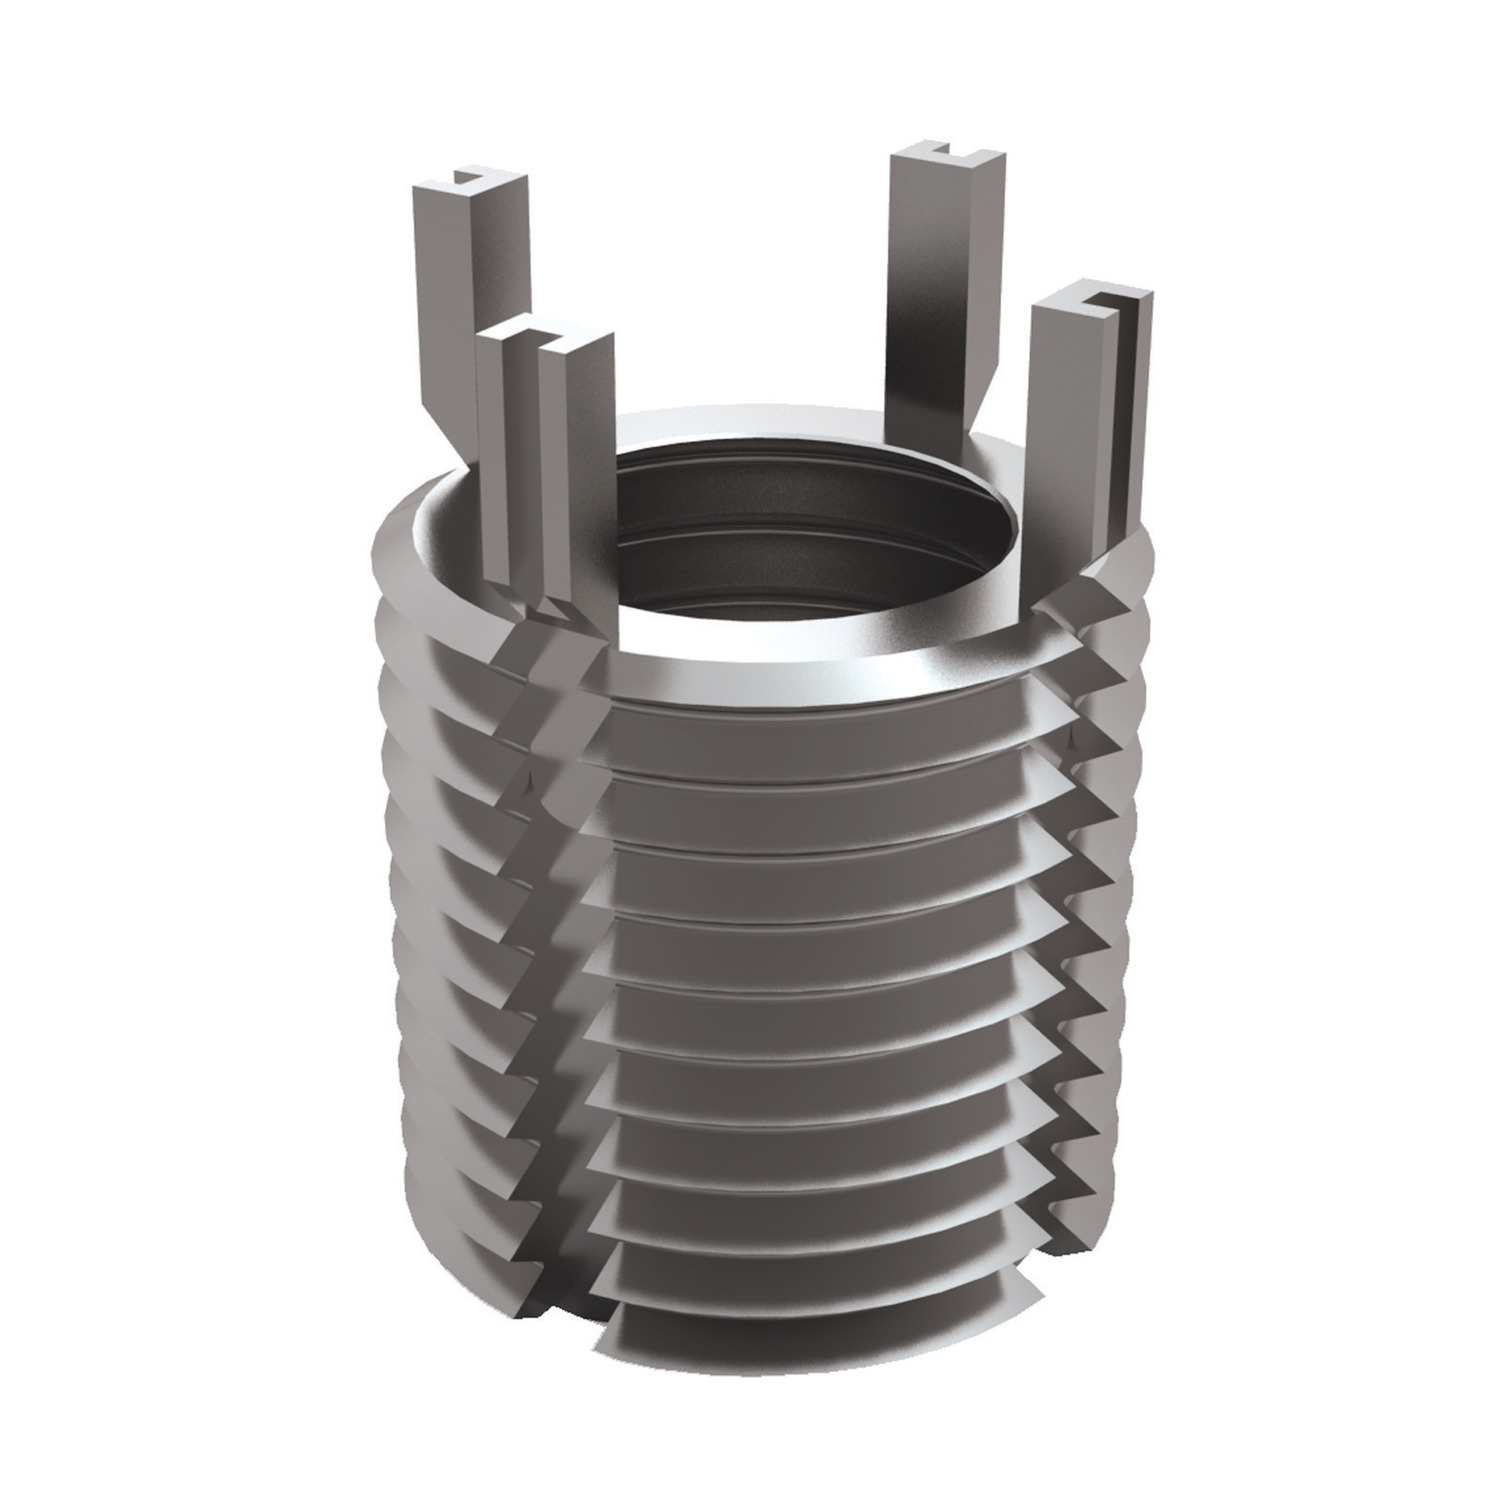 Threaded Insert - Metric - Inch Stainless steel versions of our heavy duty inserts, suited for corrosion resistant applications.